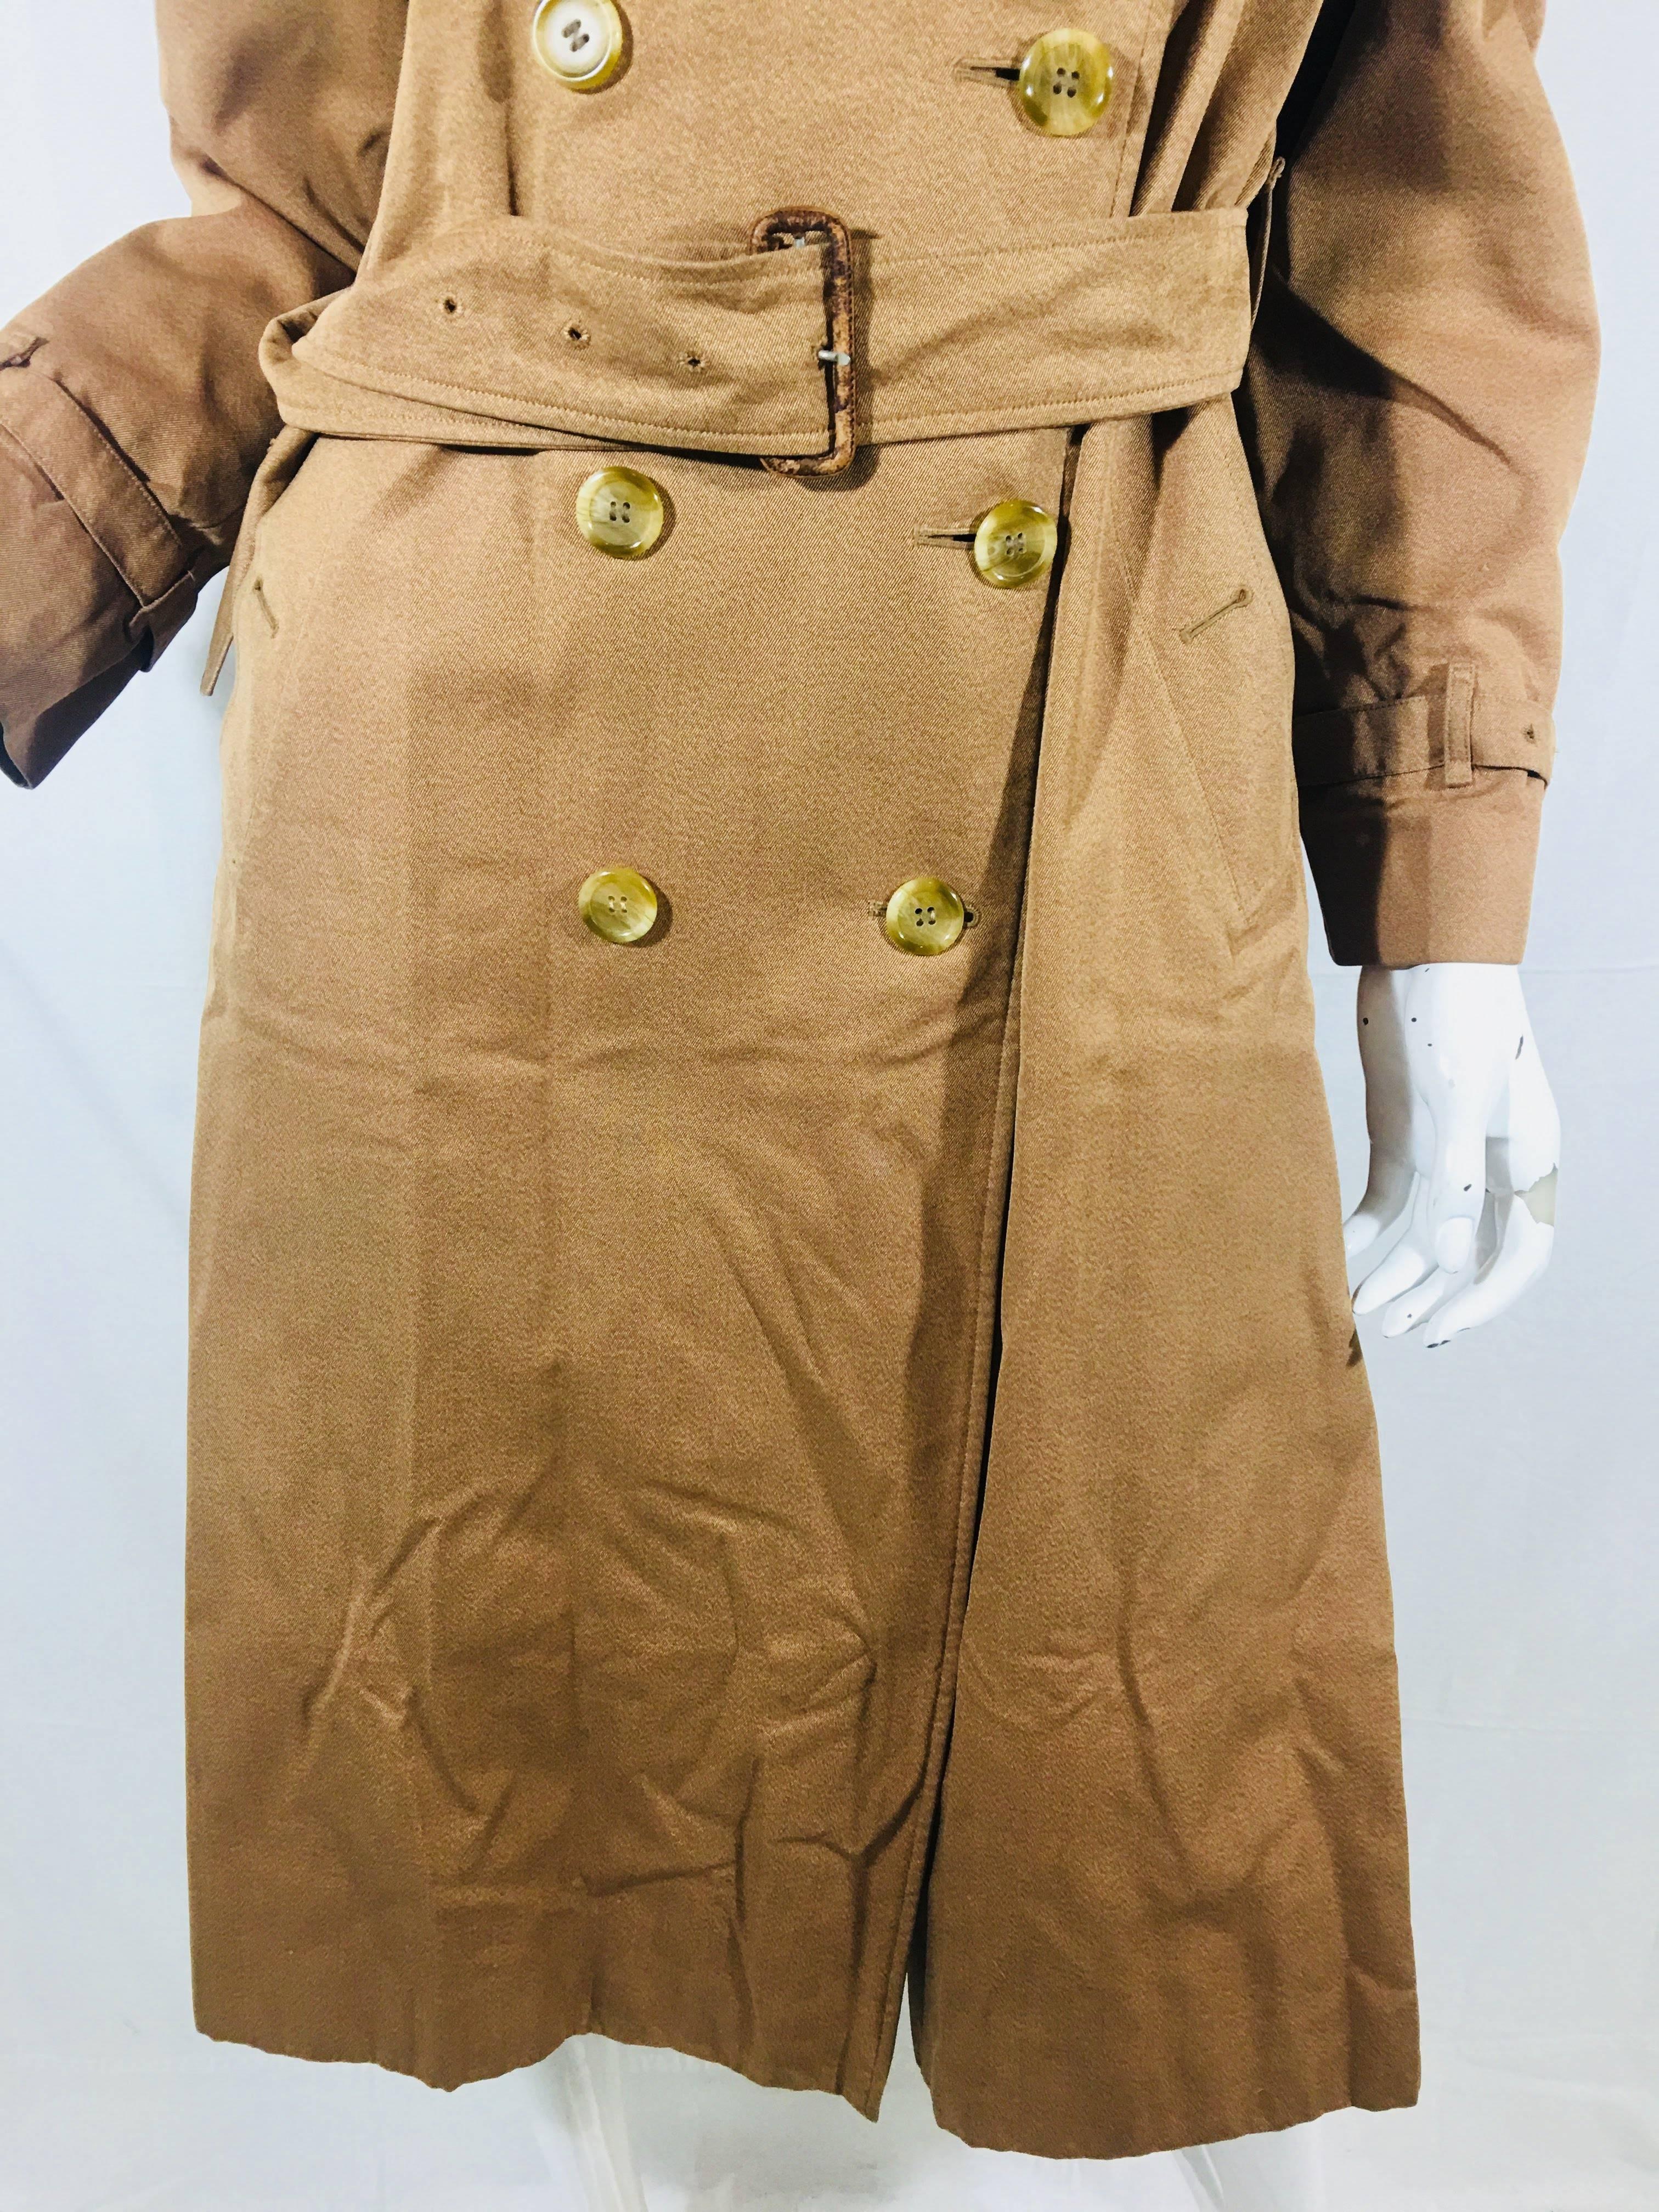 Burberry Double Breasted Trench Coat with Waist Belt, Signature Burberry Plaid Lining.